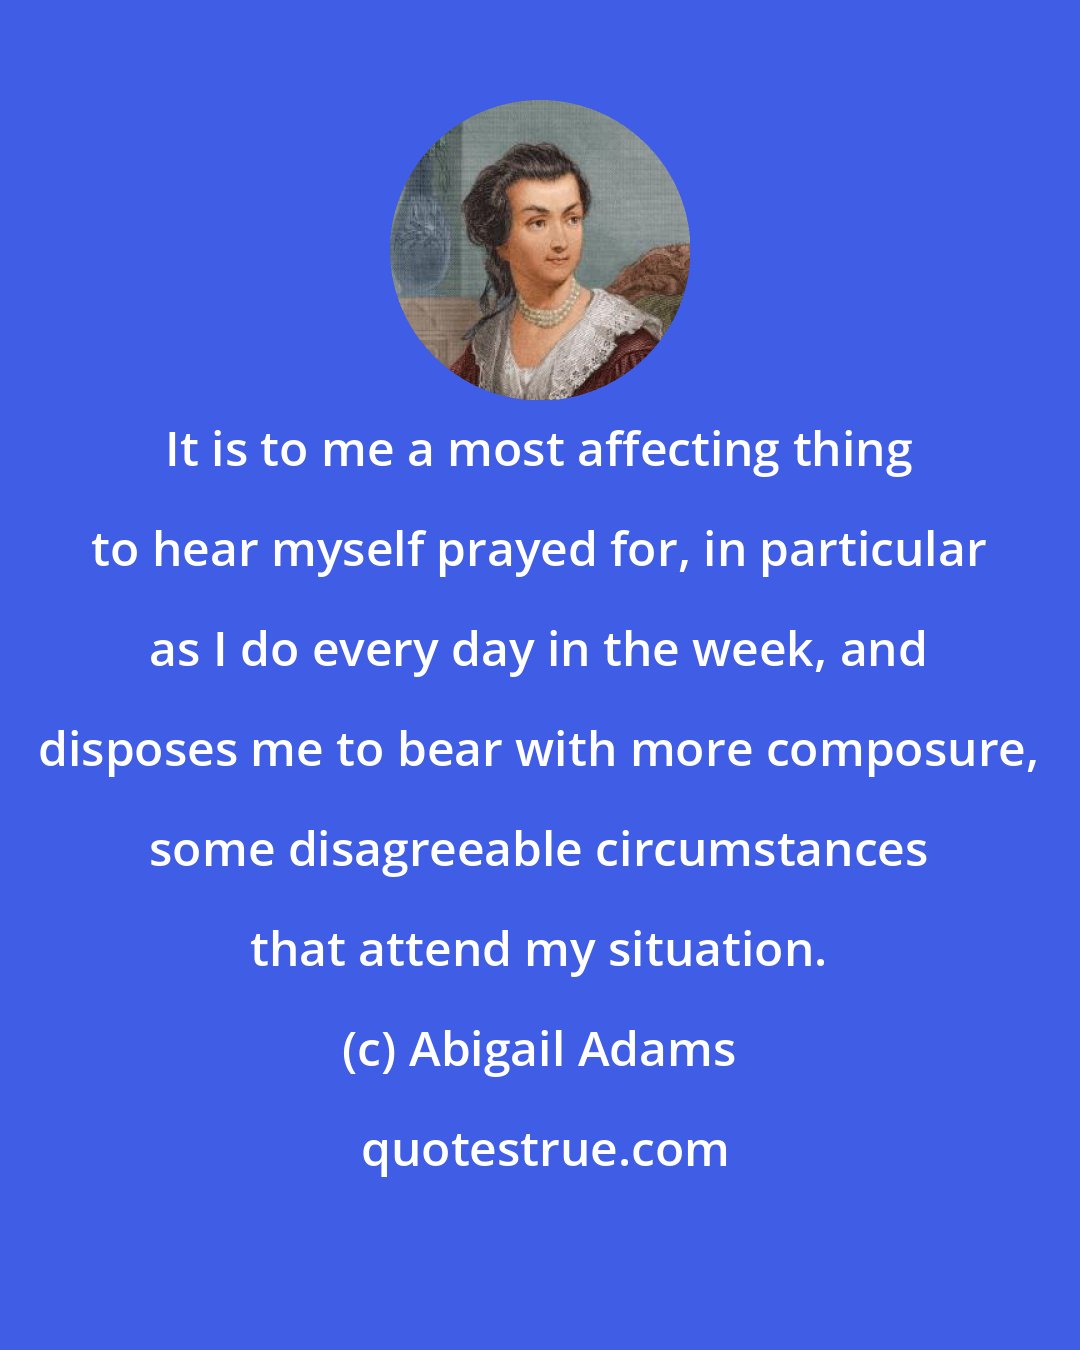 Abigail Adams: It is to me a most affecting thing to hear myself prayed for, in particular as I do every day in the week, and disposes me to bear with more composure, some disagreeable circumstances that attend my situation.